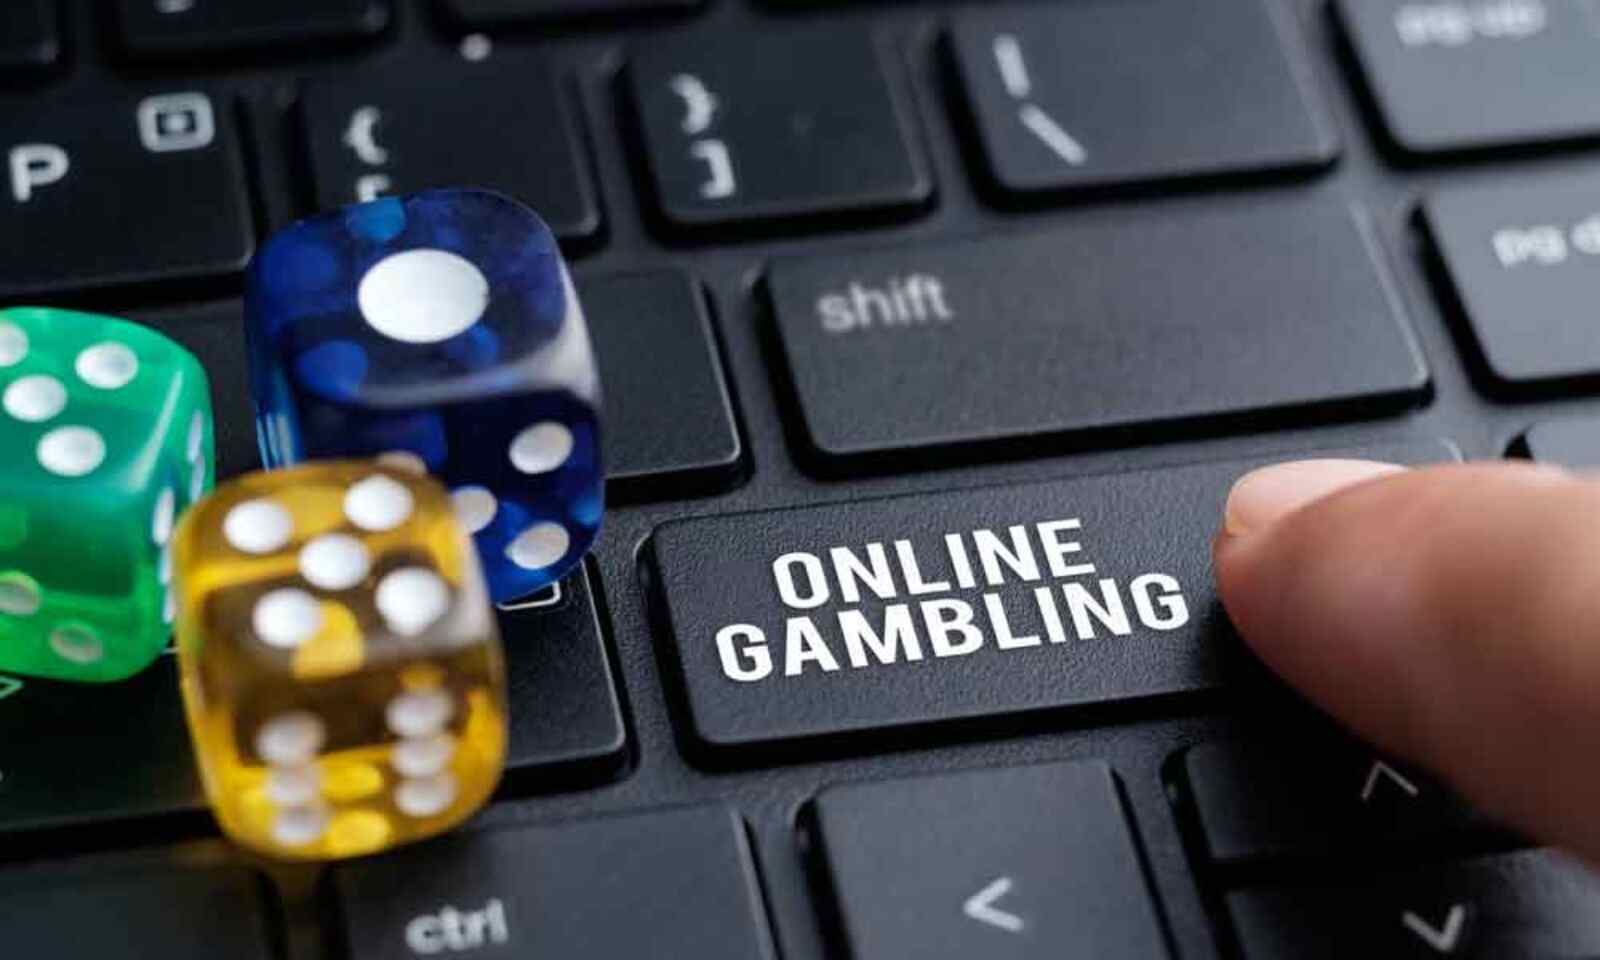 Online gambling websites: State govt responsible to take action, High Court  told